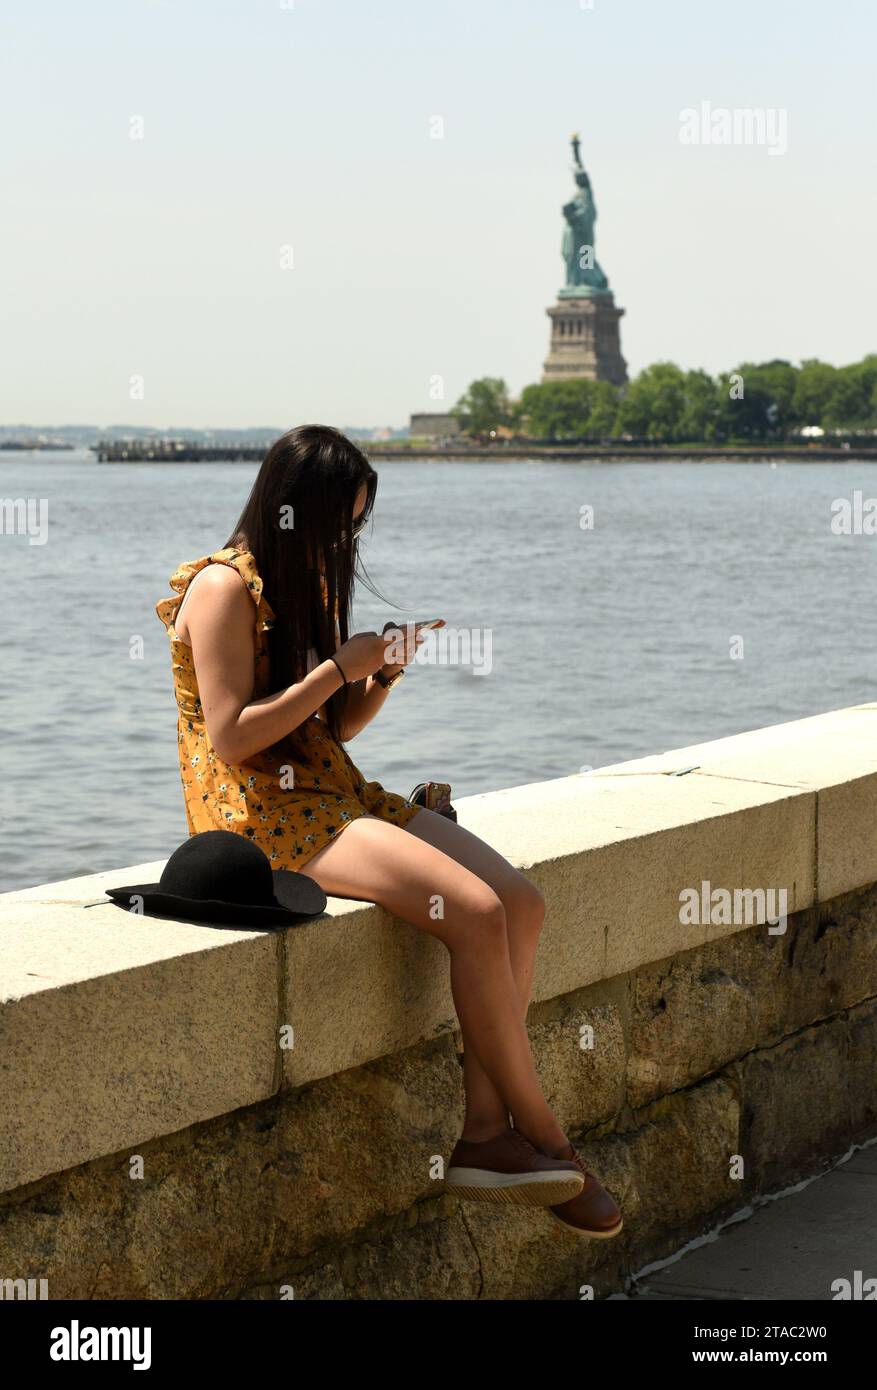 New York, USA - June 09, 2018: The girl use a smartphone at the Ellis Island with  the Statue of Liberty on the background. Stock Photo